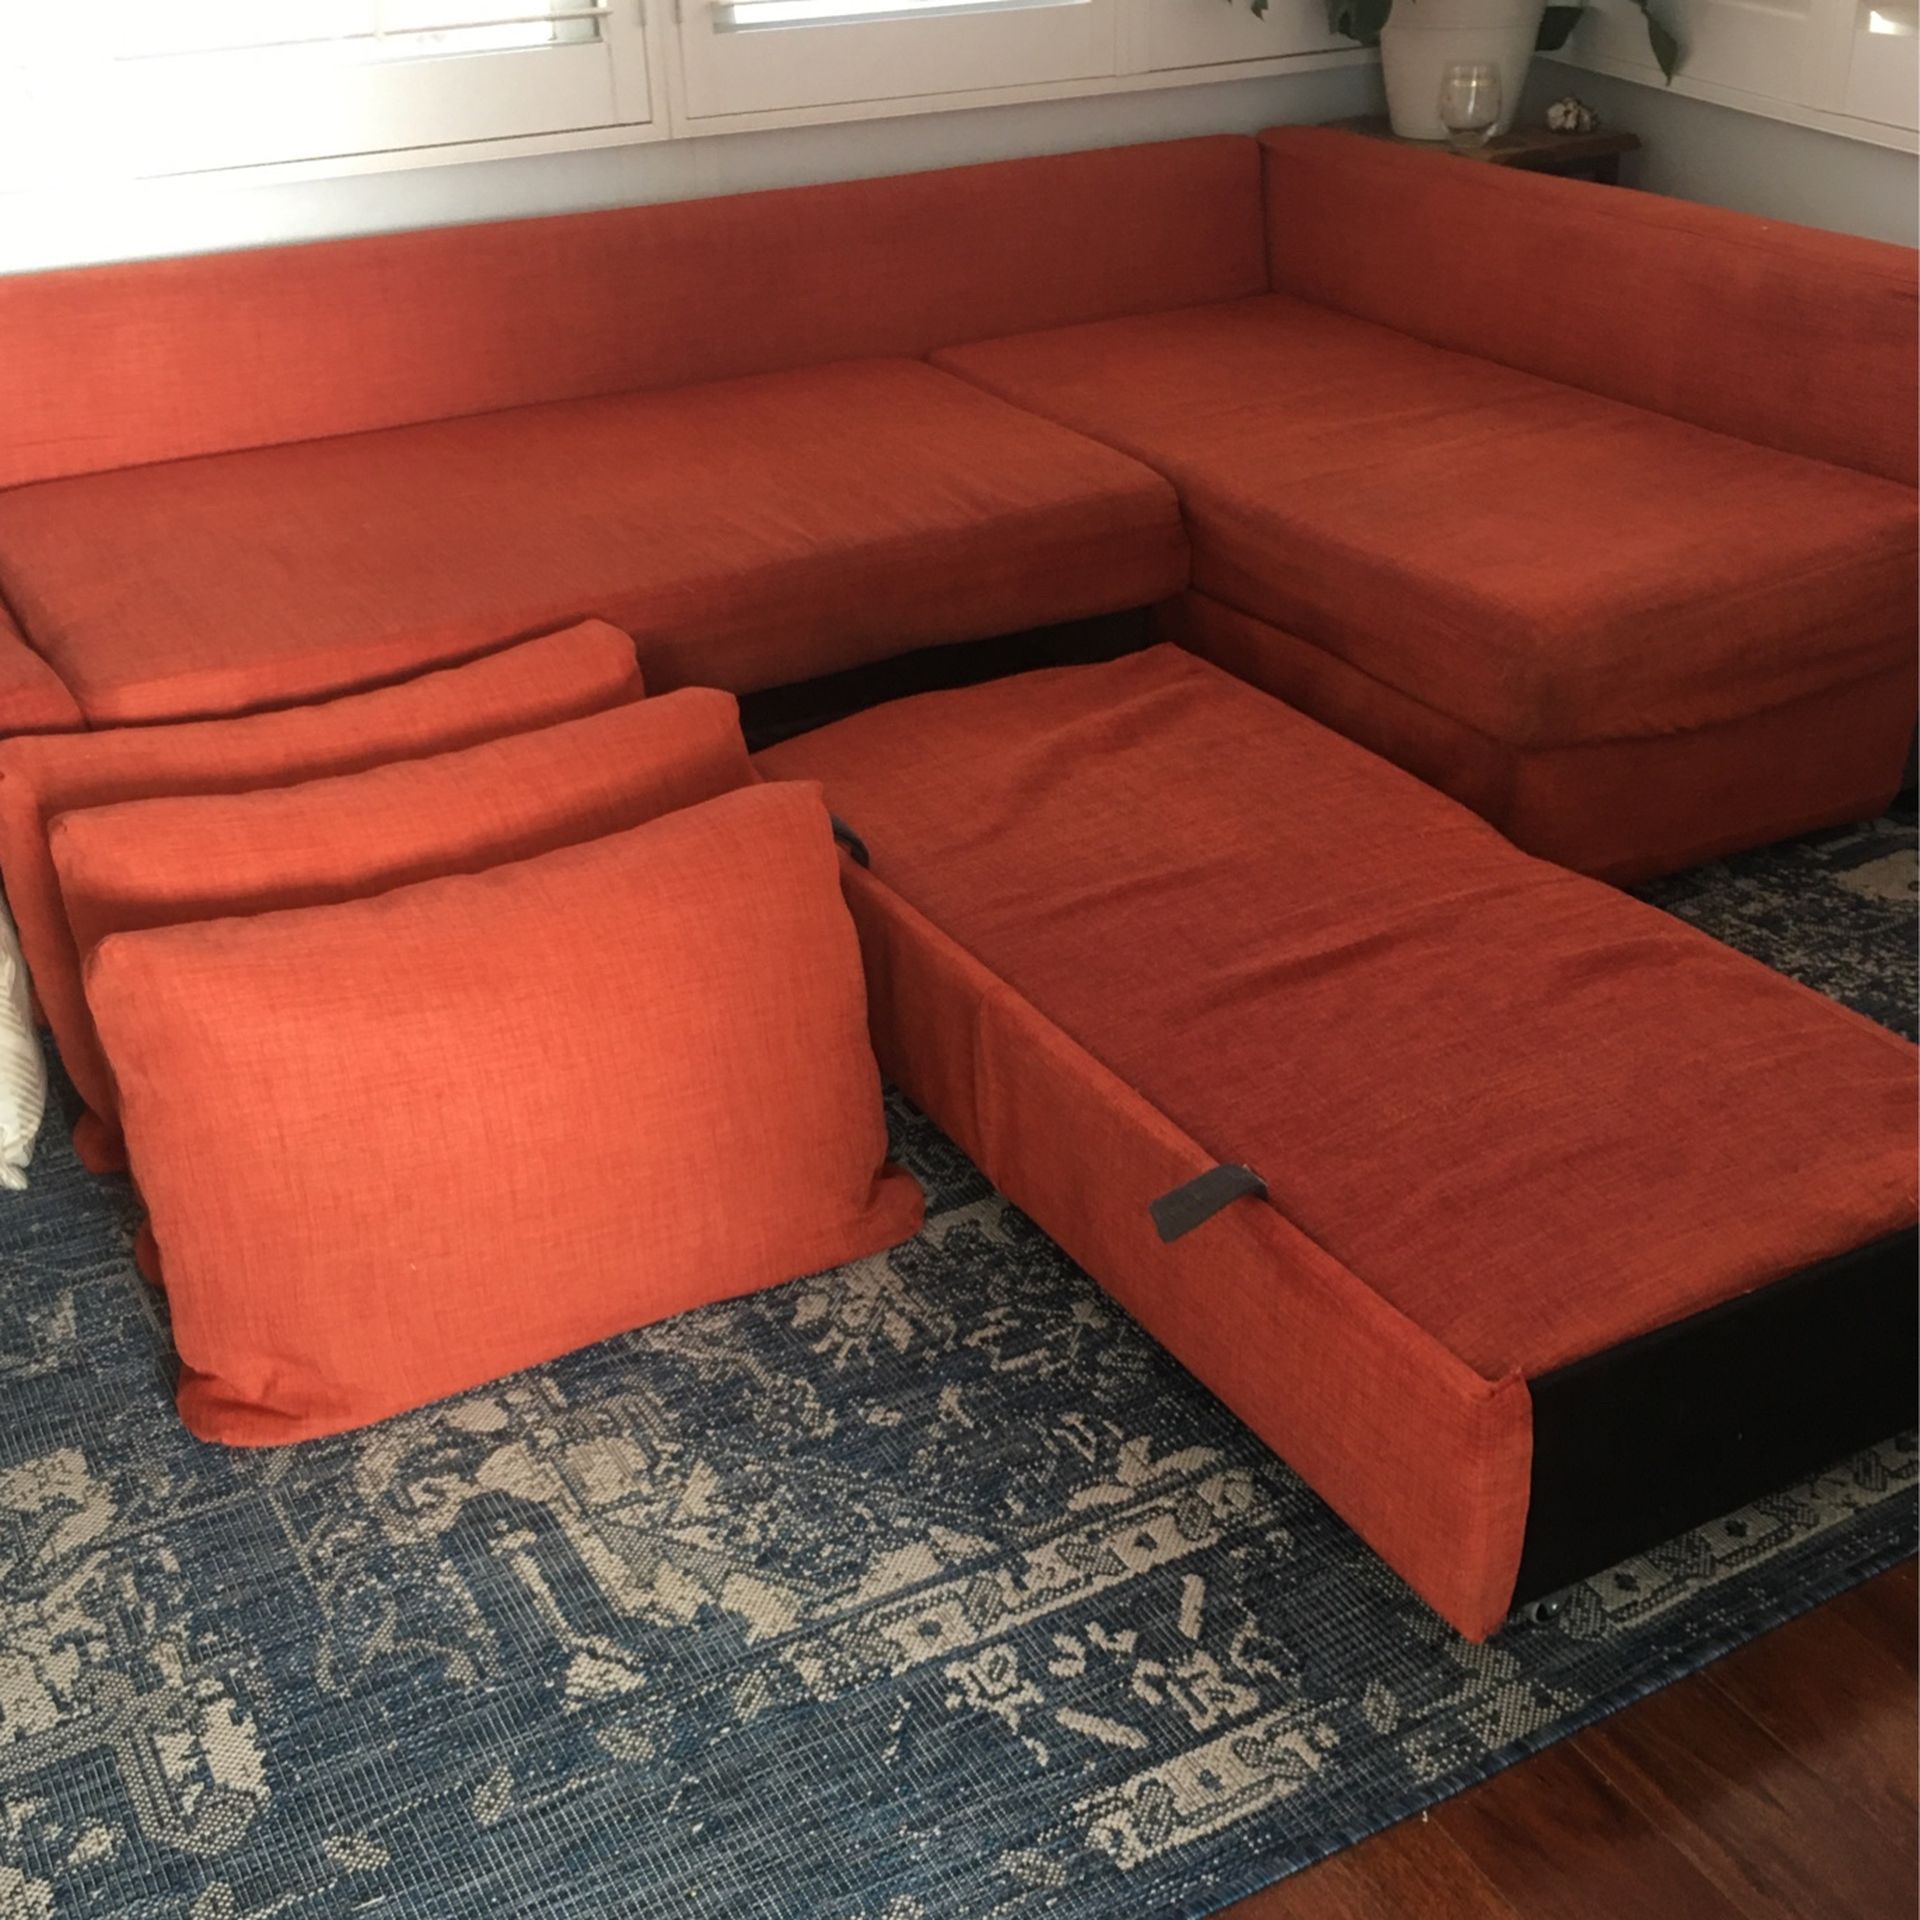 Ikea Freighton Sofa Bed Couch Need Gone ASAP!!